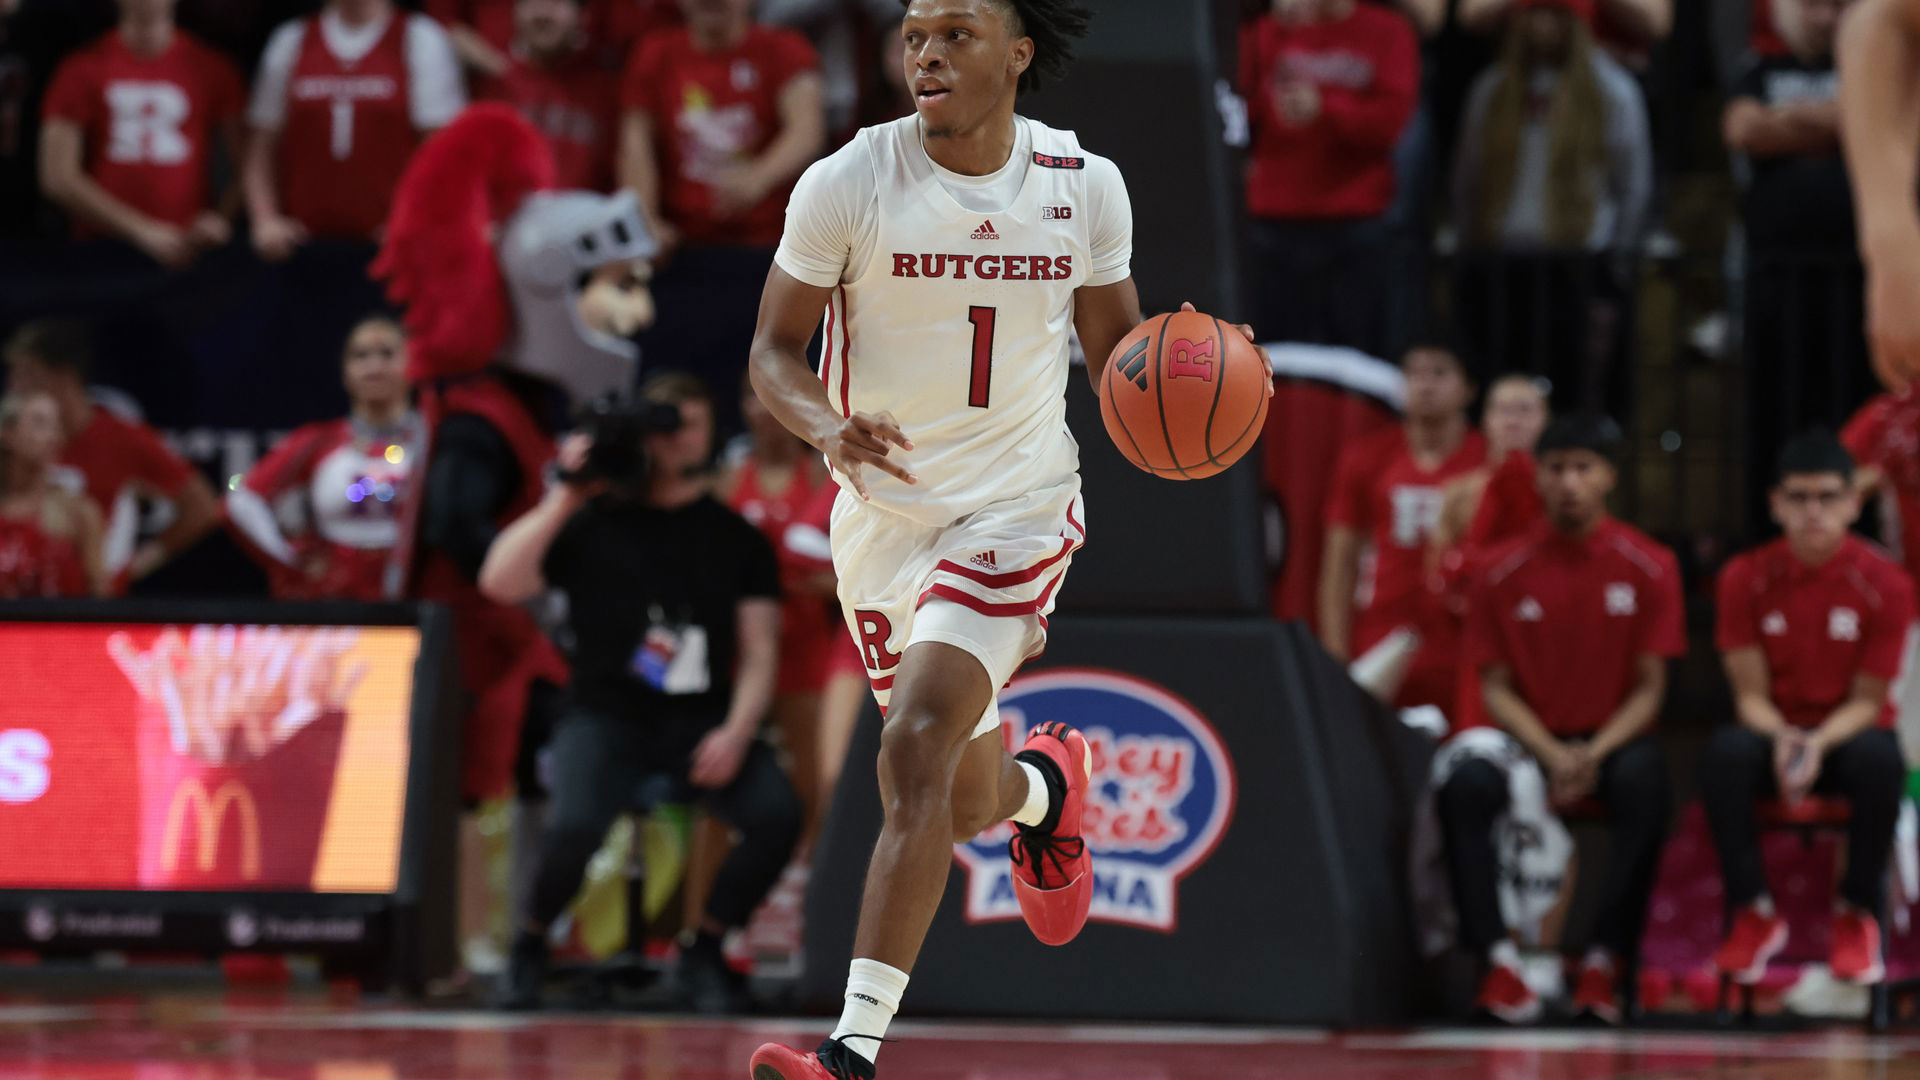 Rutgers handles in Gavitt Tipoff Games with strong defensive